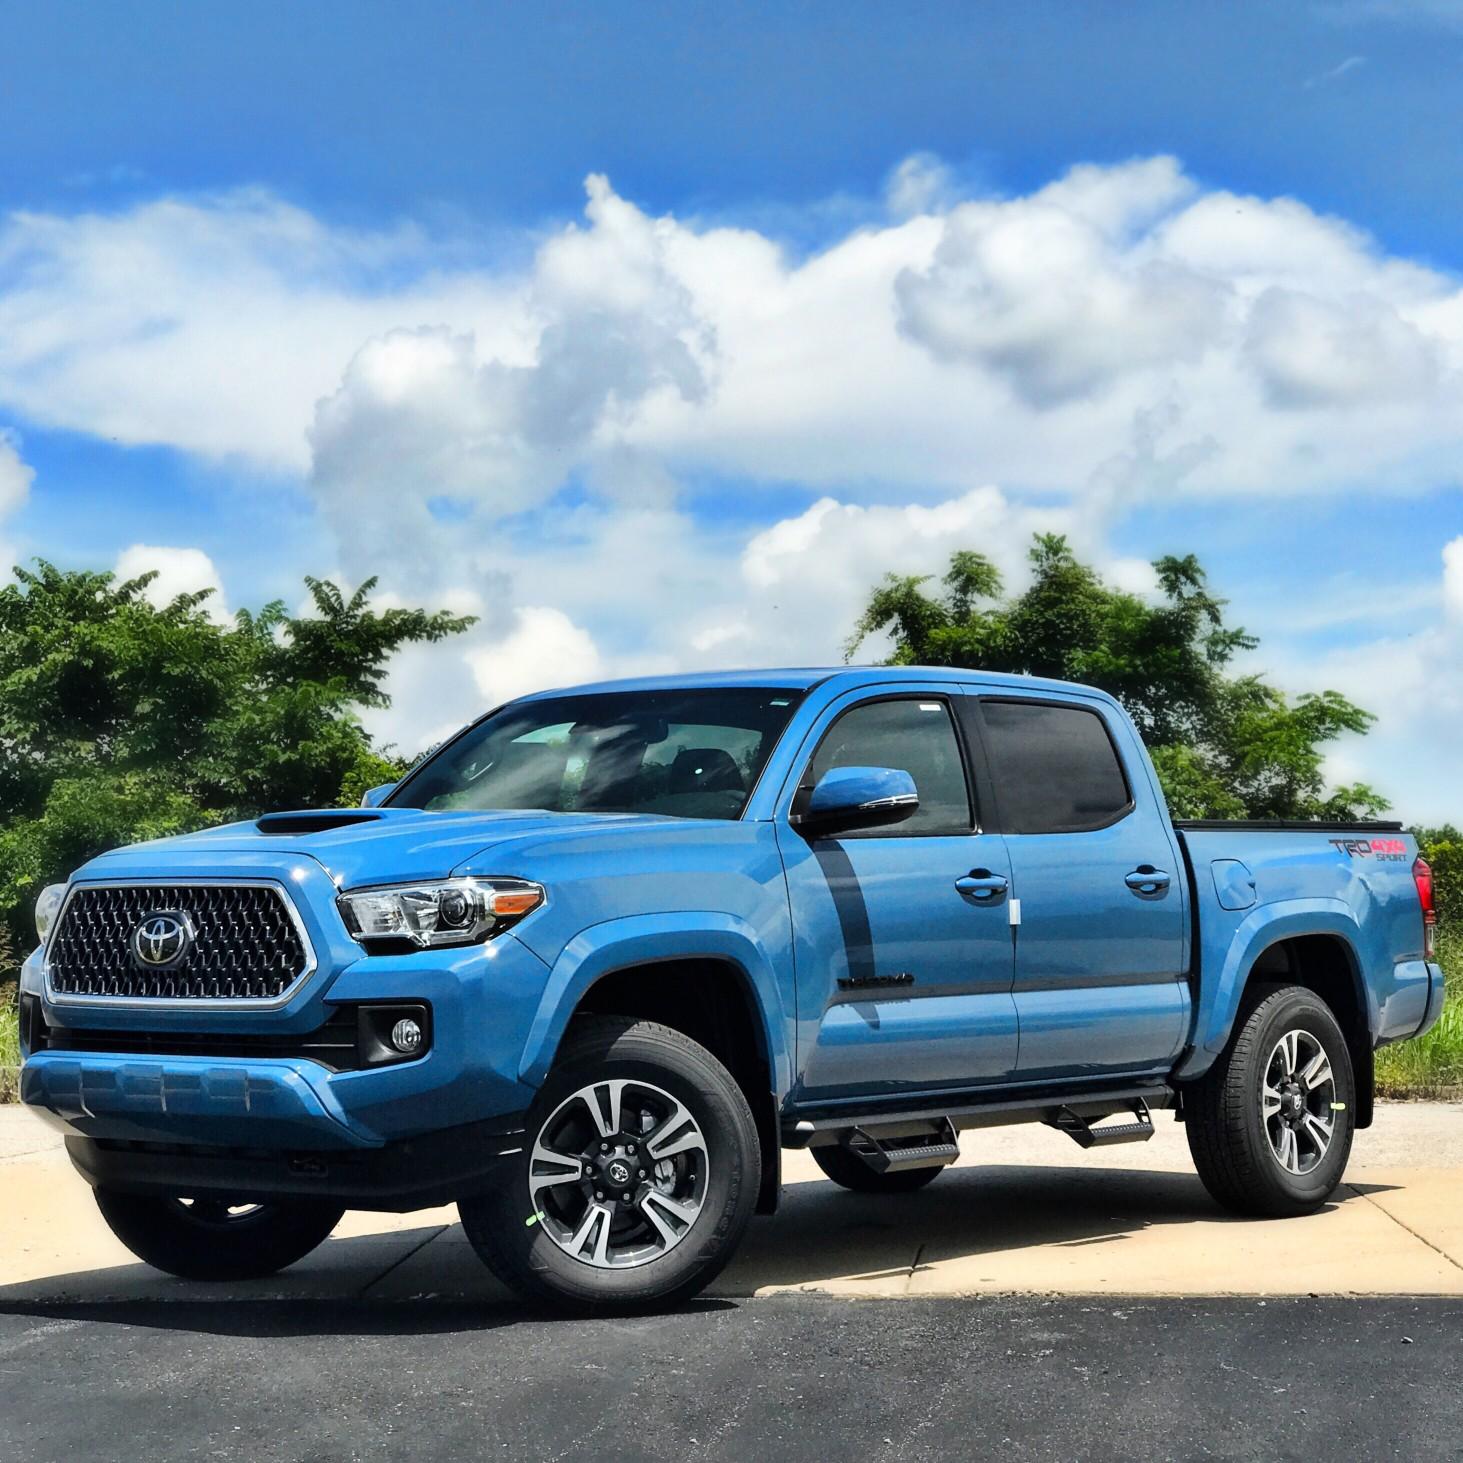 The Toyota Tacoma is one of the most trusted trucks on the road | Twenty20